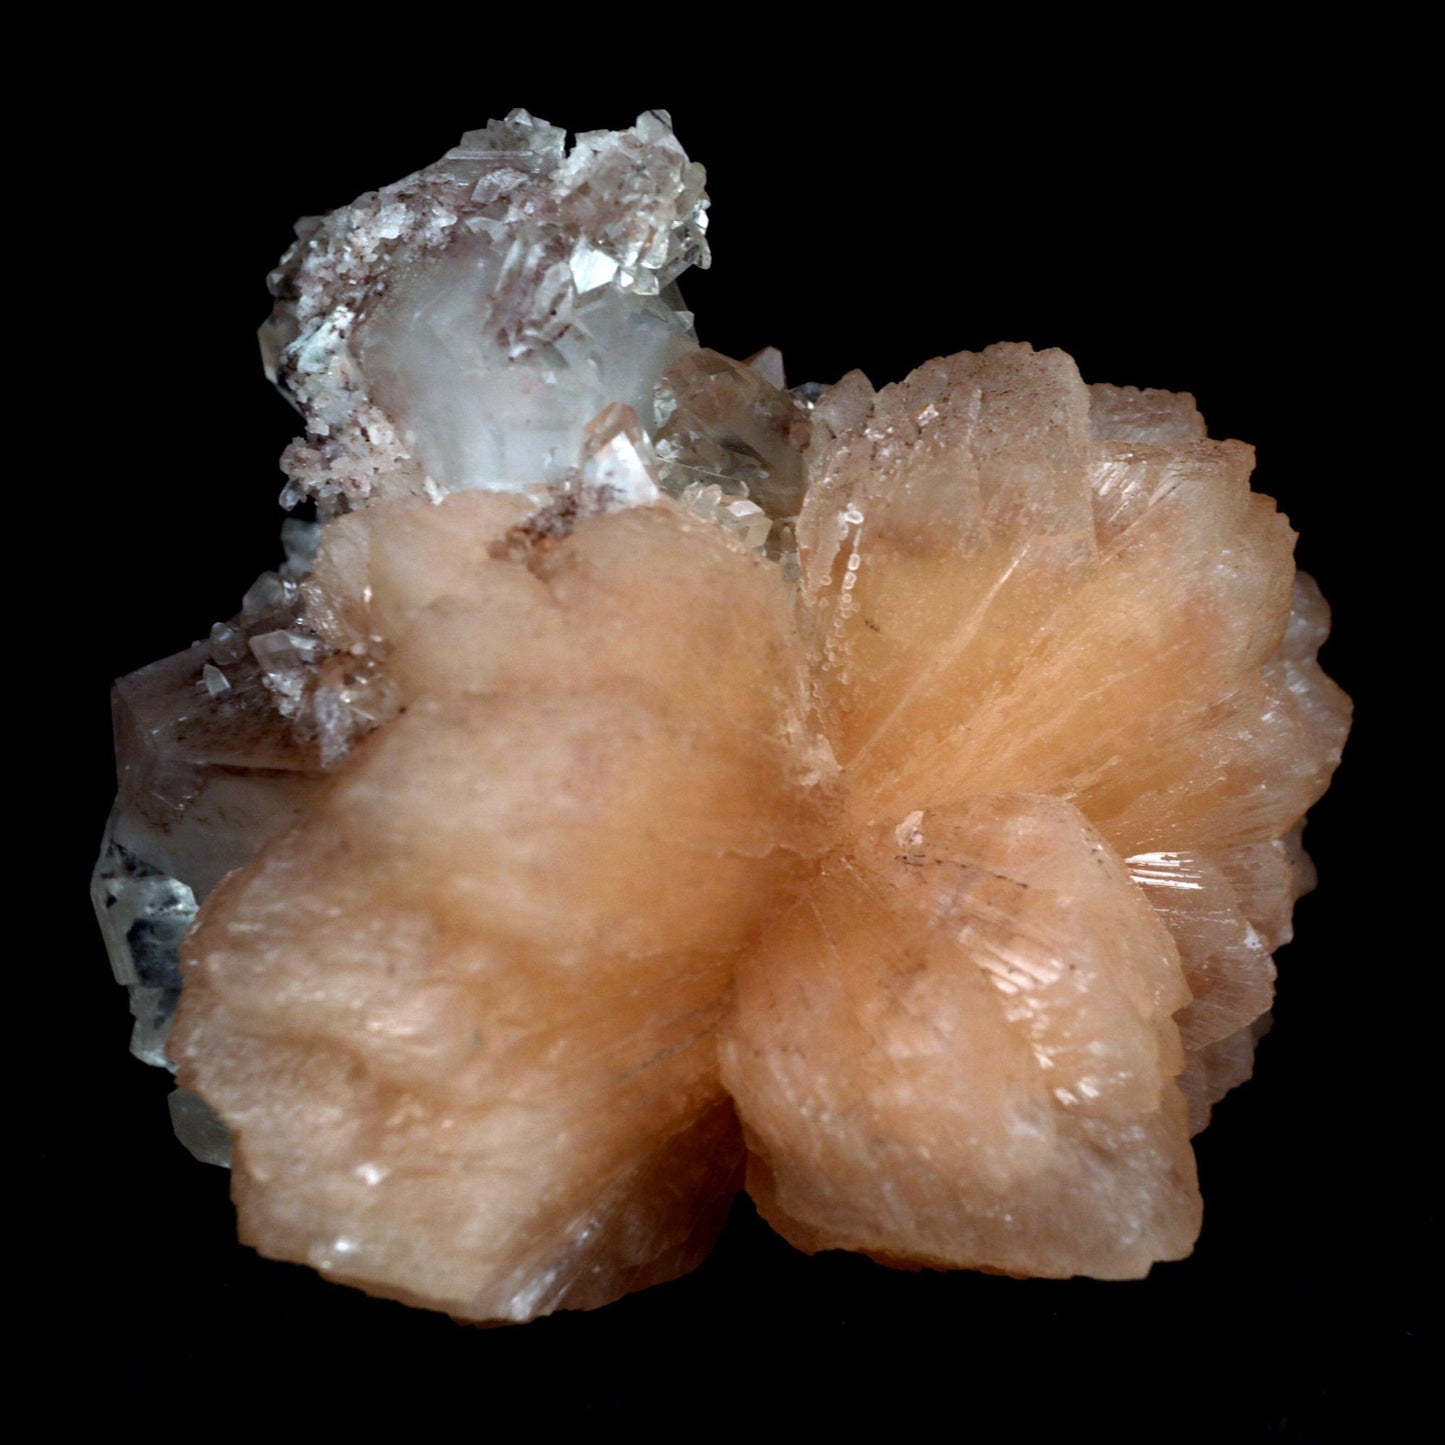 Apophyllite With Stilbite Perfect Bow-Tie formation Natural Mineral Sp…  https://www.superbminerals.us/products/apophyllite-with-stilbite-perfect-bow-tie-formation-natural-mineral-specimen-b-4796  Features: A stunning, large&nbsp; doubly terminated stilbite bowtie with fantastic broad form is aesthetically set on the Chalcedony basalt matrix. The highly lustrous, translucent, cream-colored stilbite is wonderfully complemented by the numerous lustrous, that are peppered on the matrix.